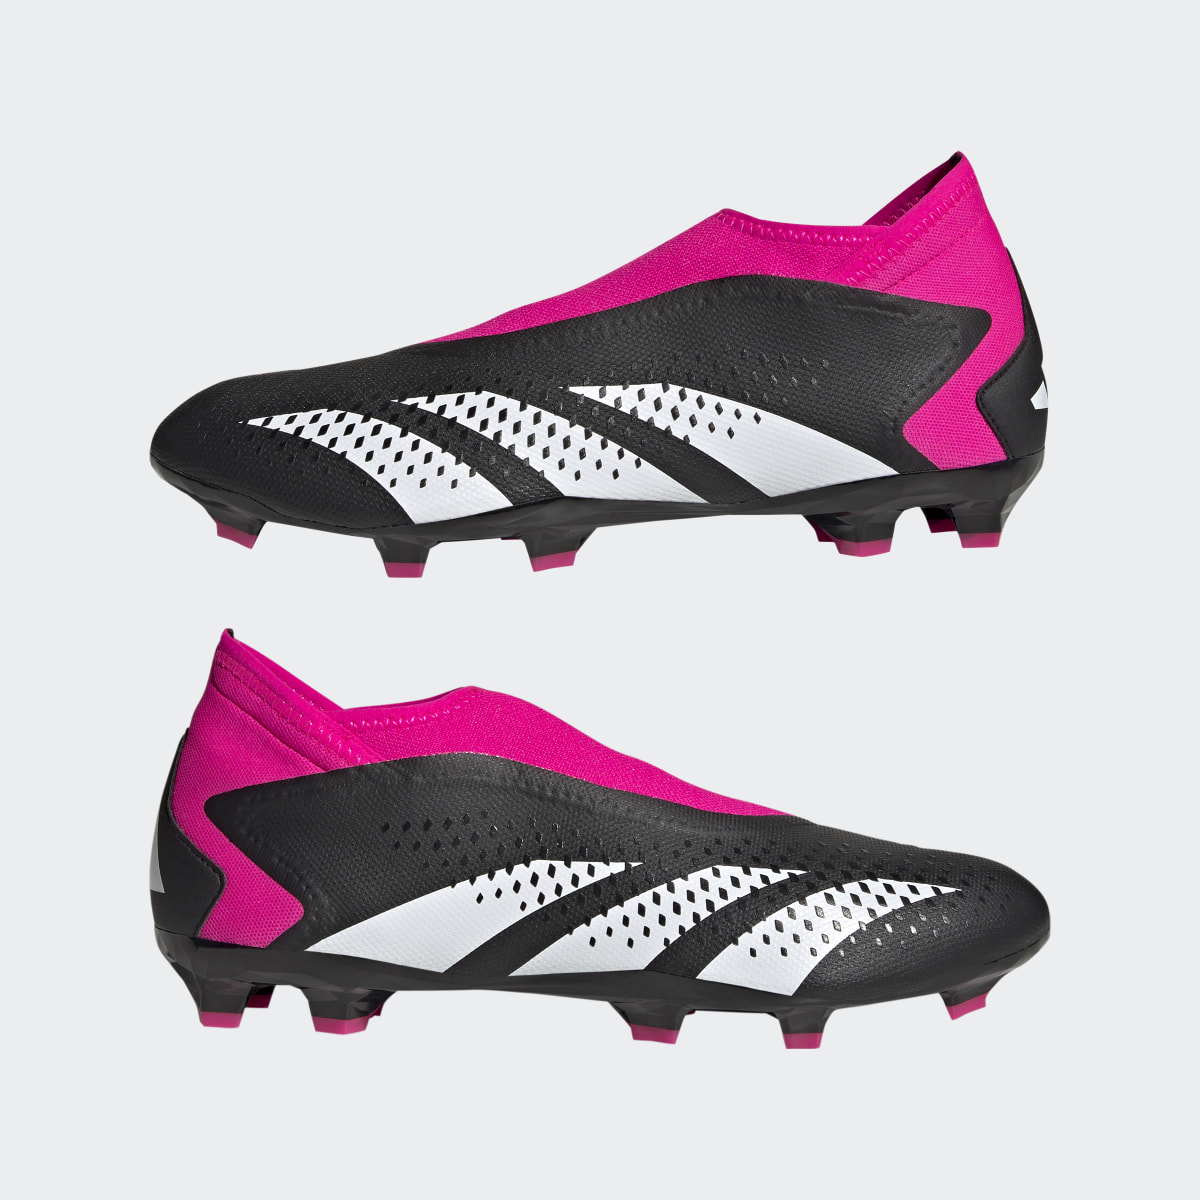 Adidas Predator Accuracy.3 Laceless Firm Ground Cleats. 4